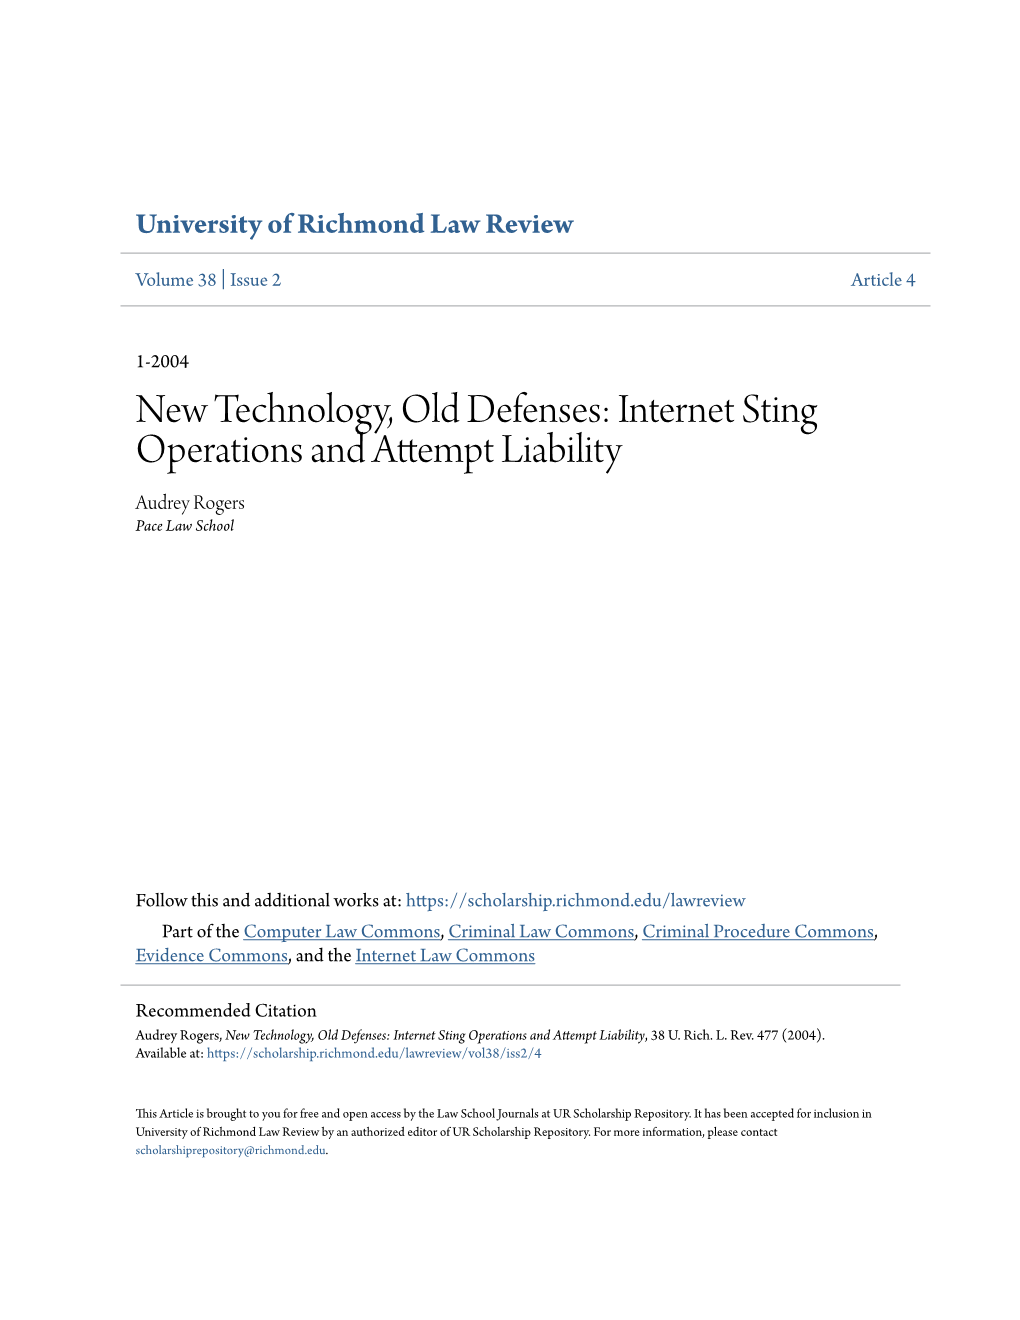 Internet Sting Operations and Attempt Liability Audrey Rogers Pace Law School